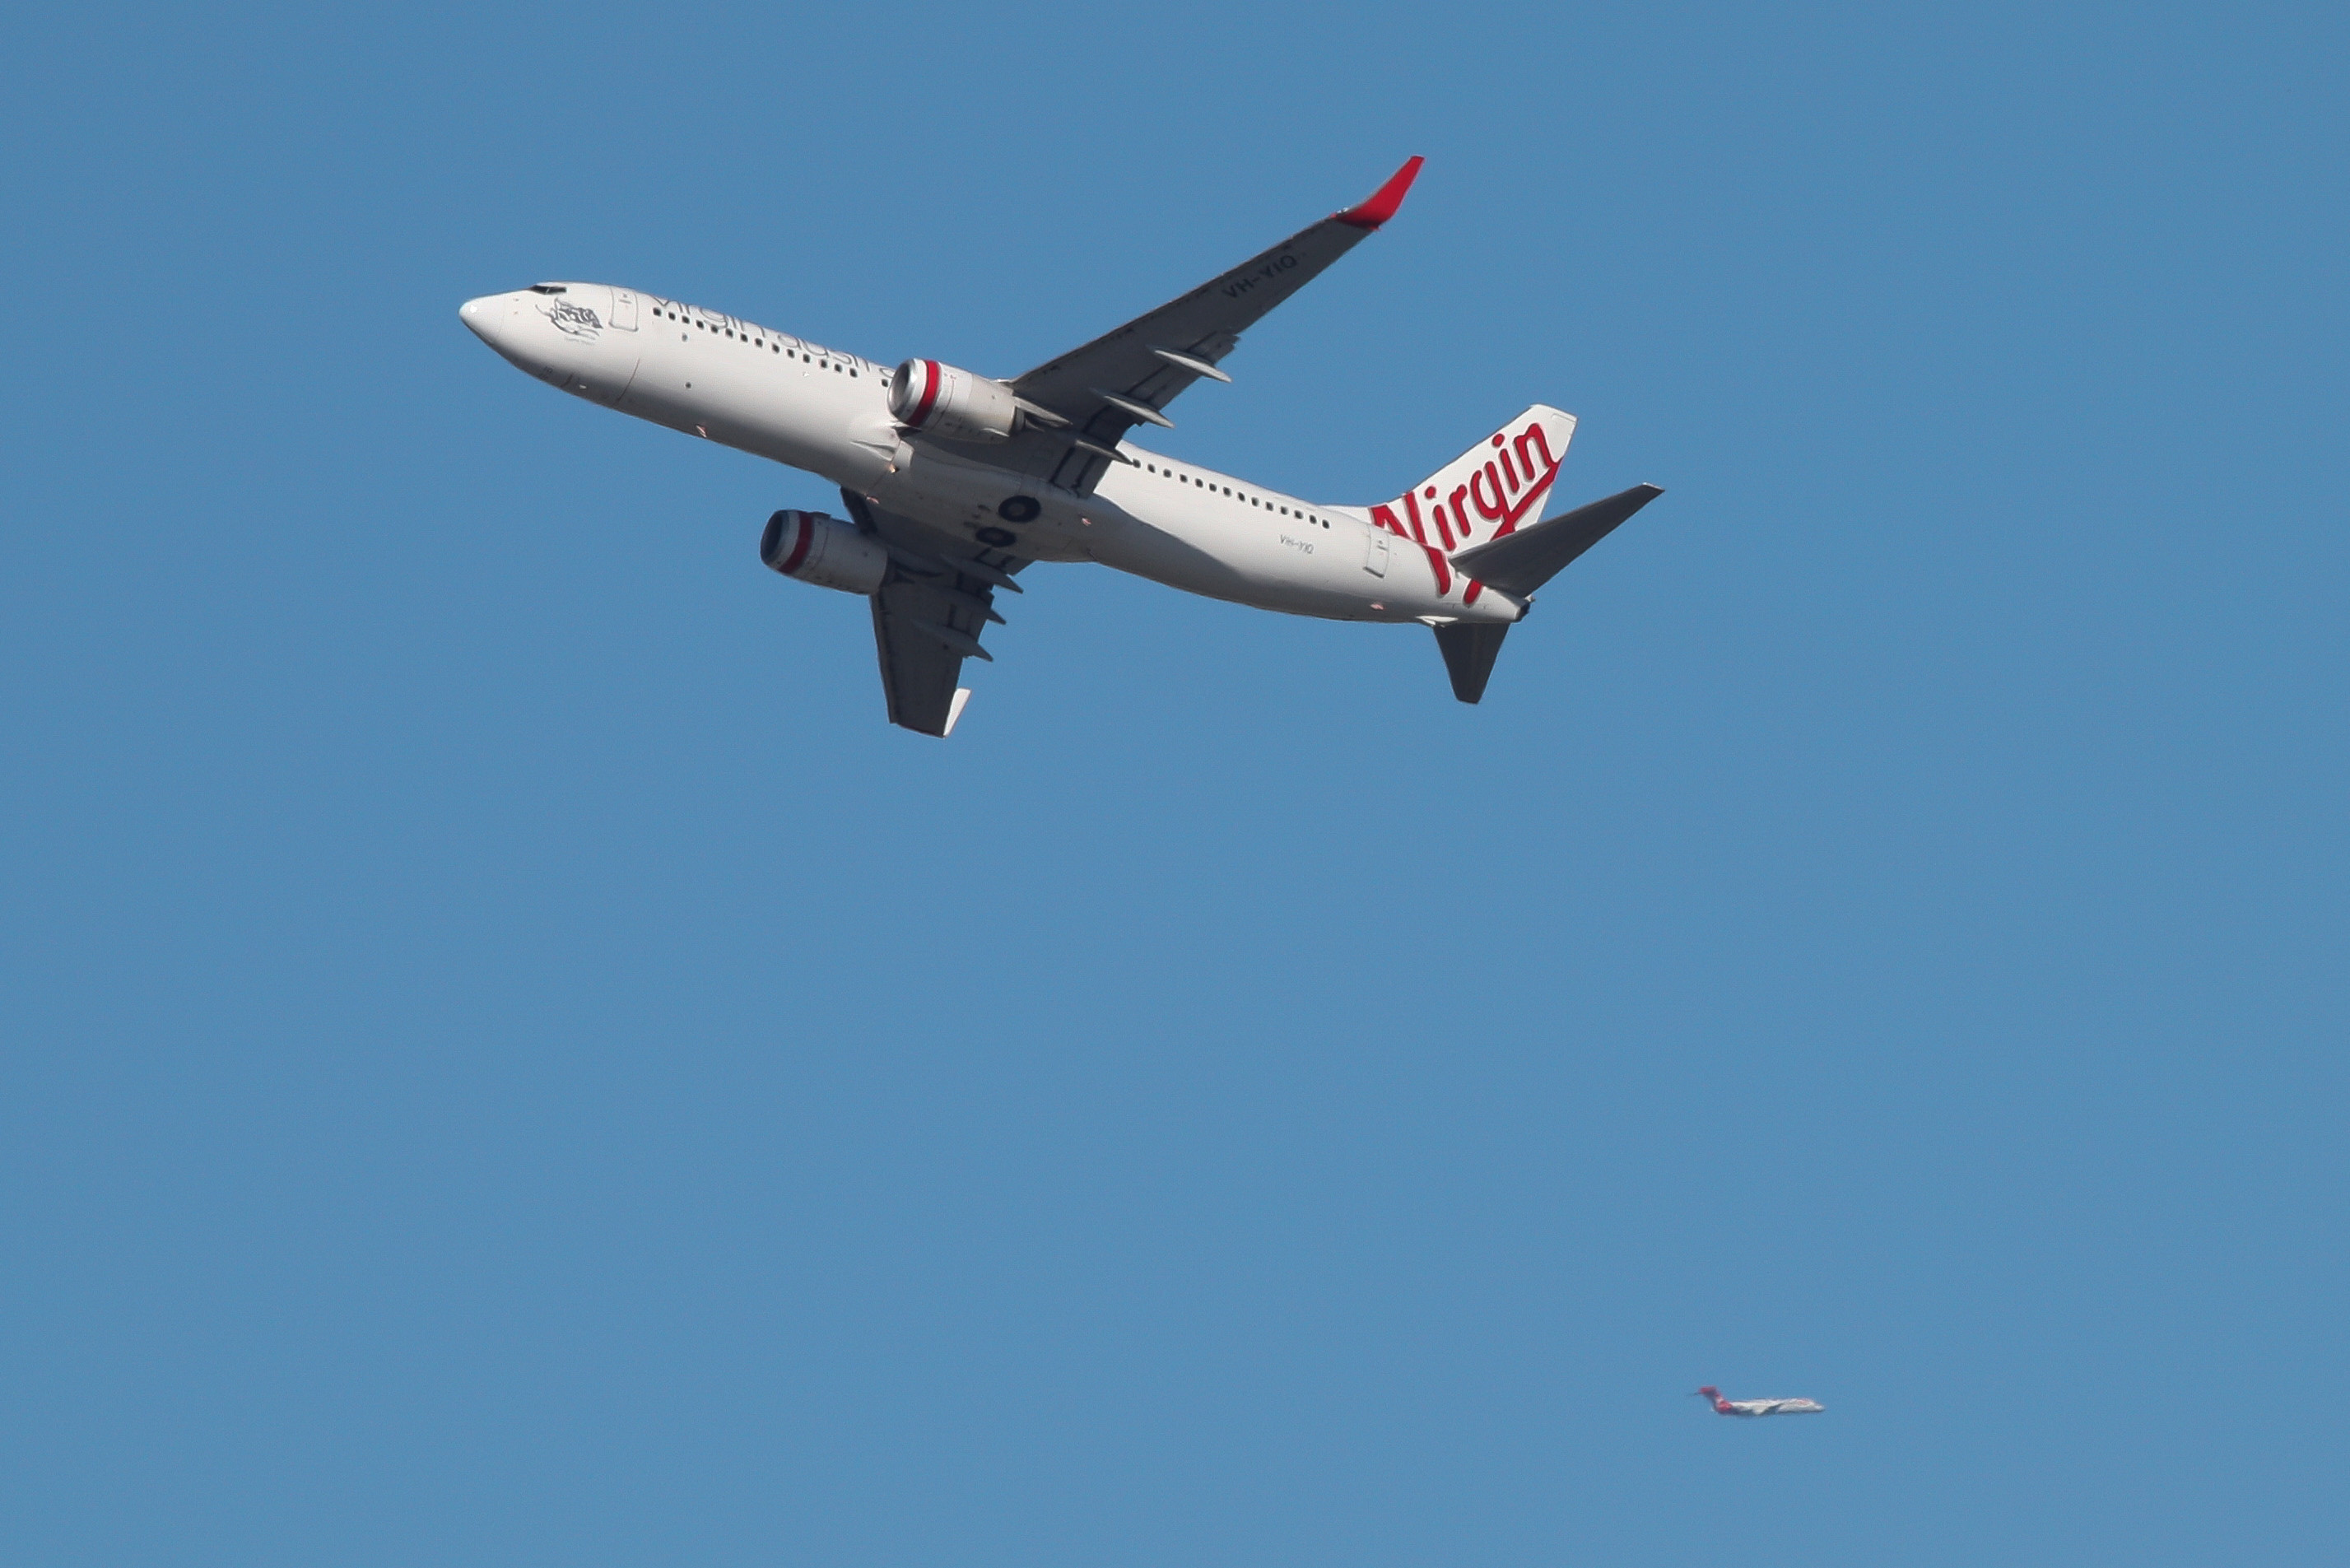 A Virgin Australia Airlines plane takes off from Kingsford Smith International Airport in Sydney